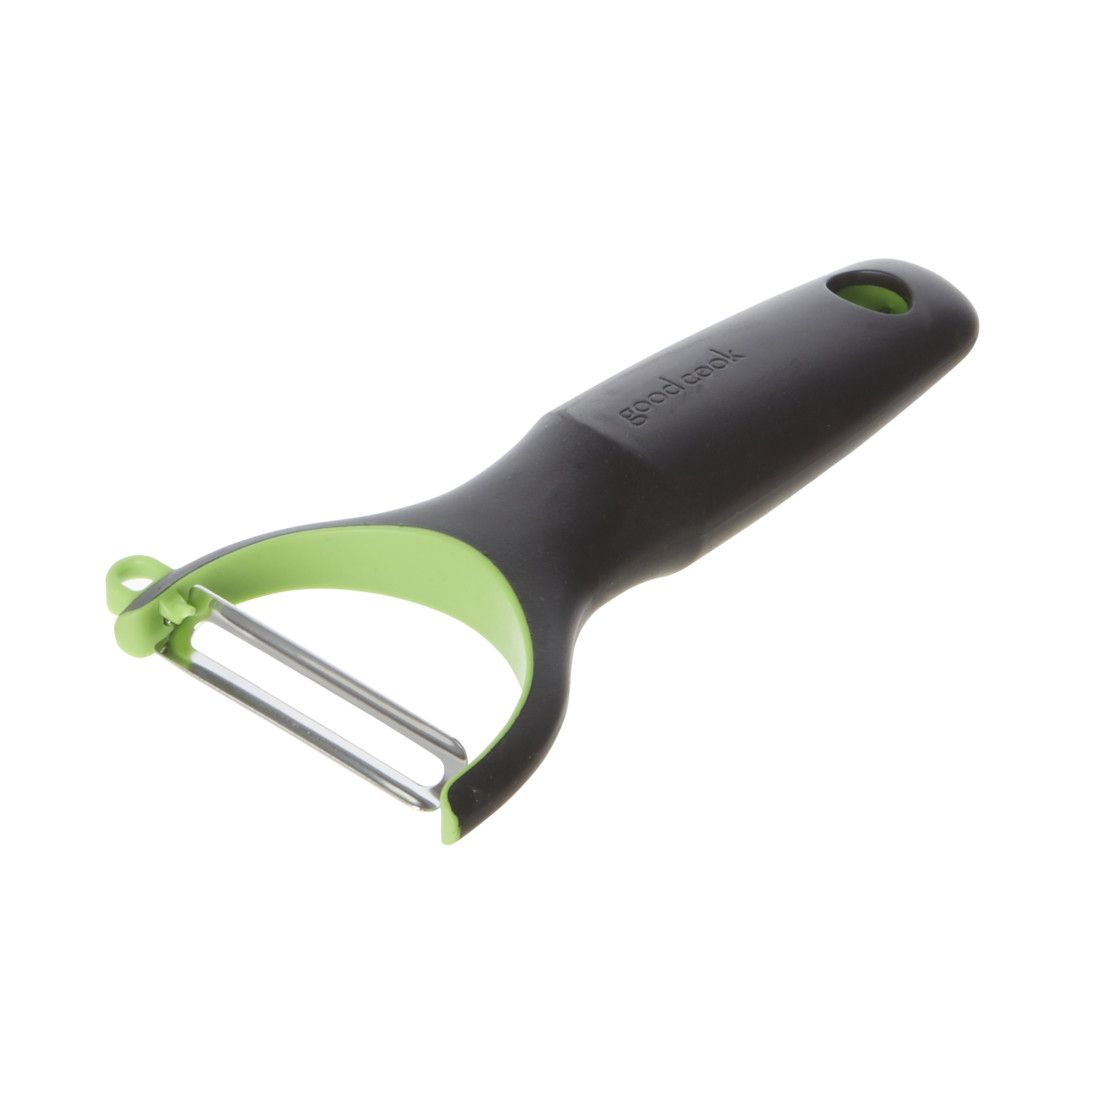 Good Cook - Chrome Plated Peeler With Stainless Steel Blade